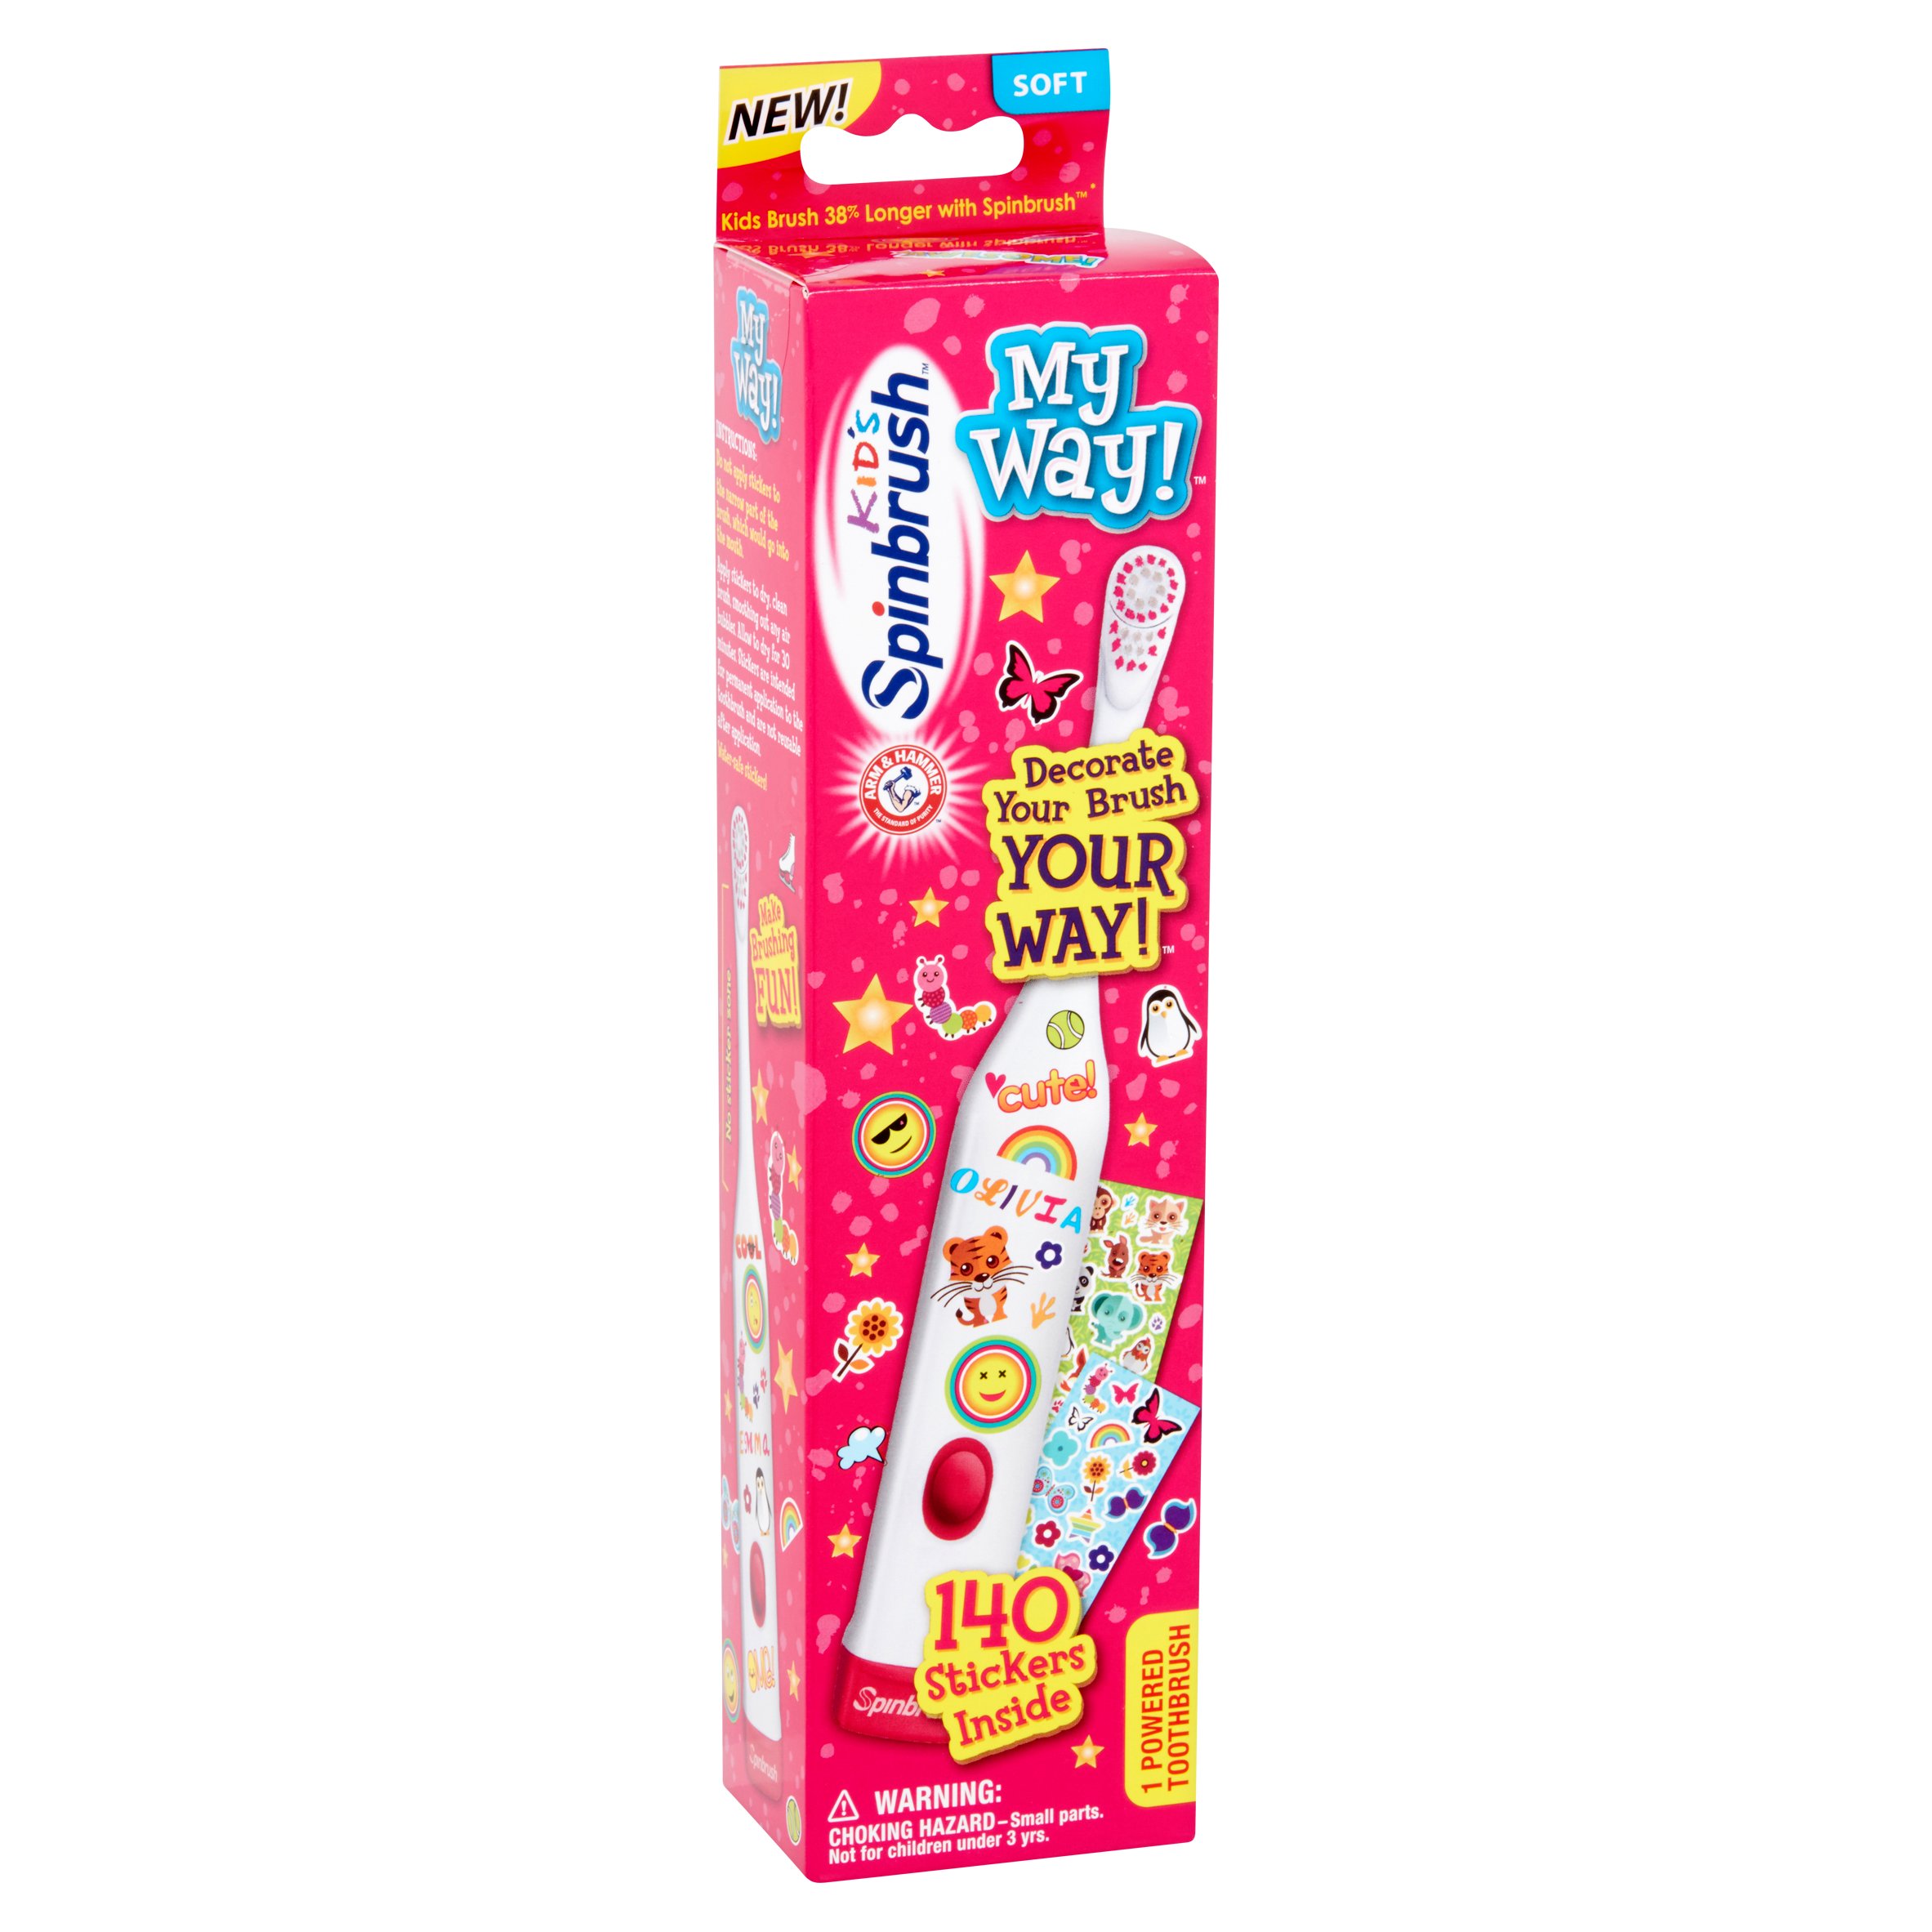 Arm & Hammer Spinbrush Kids Electric Battery Toothbrush, My Way!, 1 count - image 4 of 4